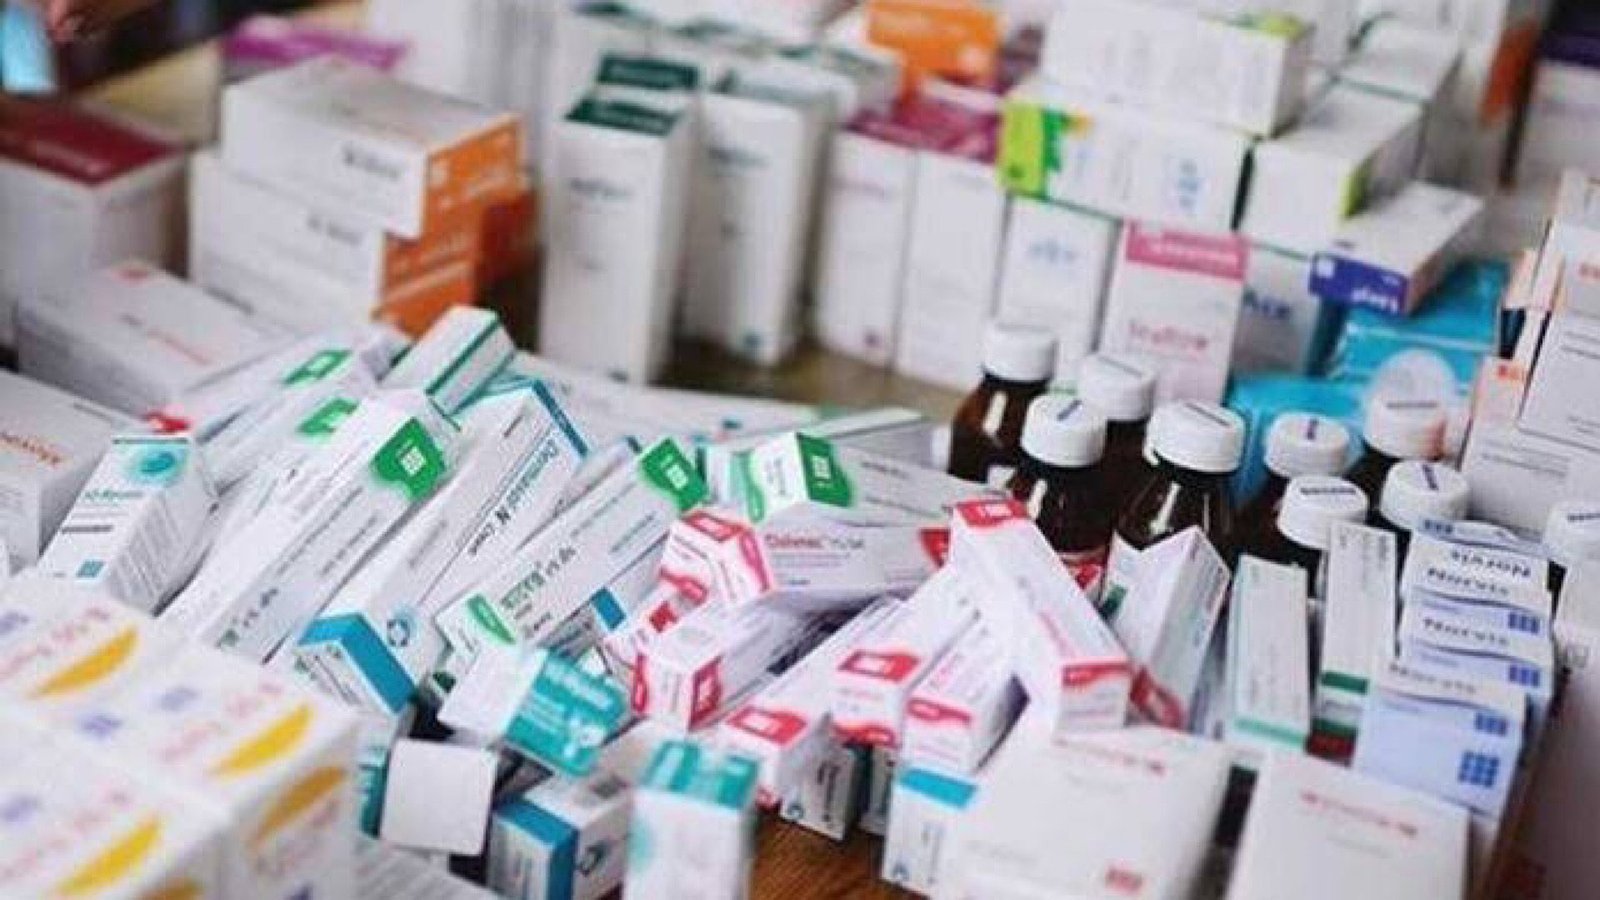 Medicine prices set to skyrocket under new government policy